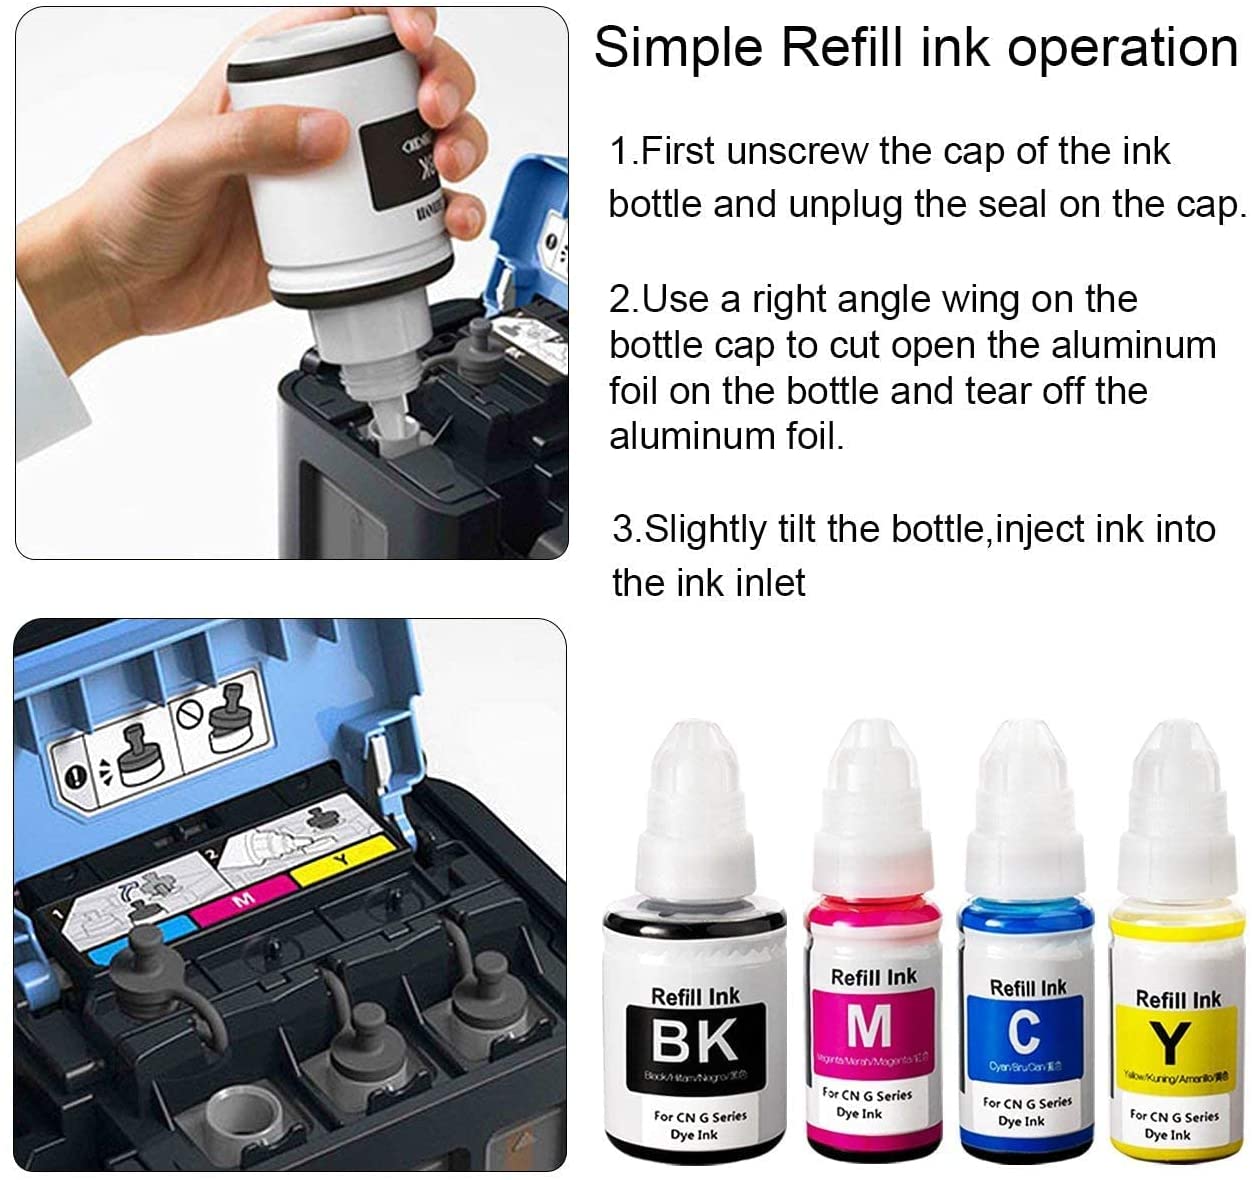 Printers Jack Compatible Canon GI-290 Refill Ink Bottle Kit for Canon